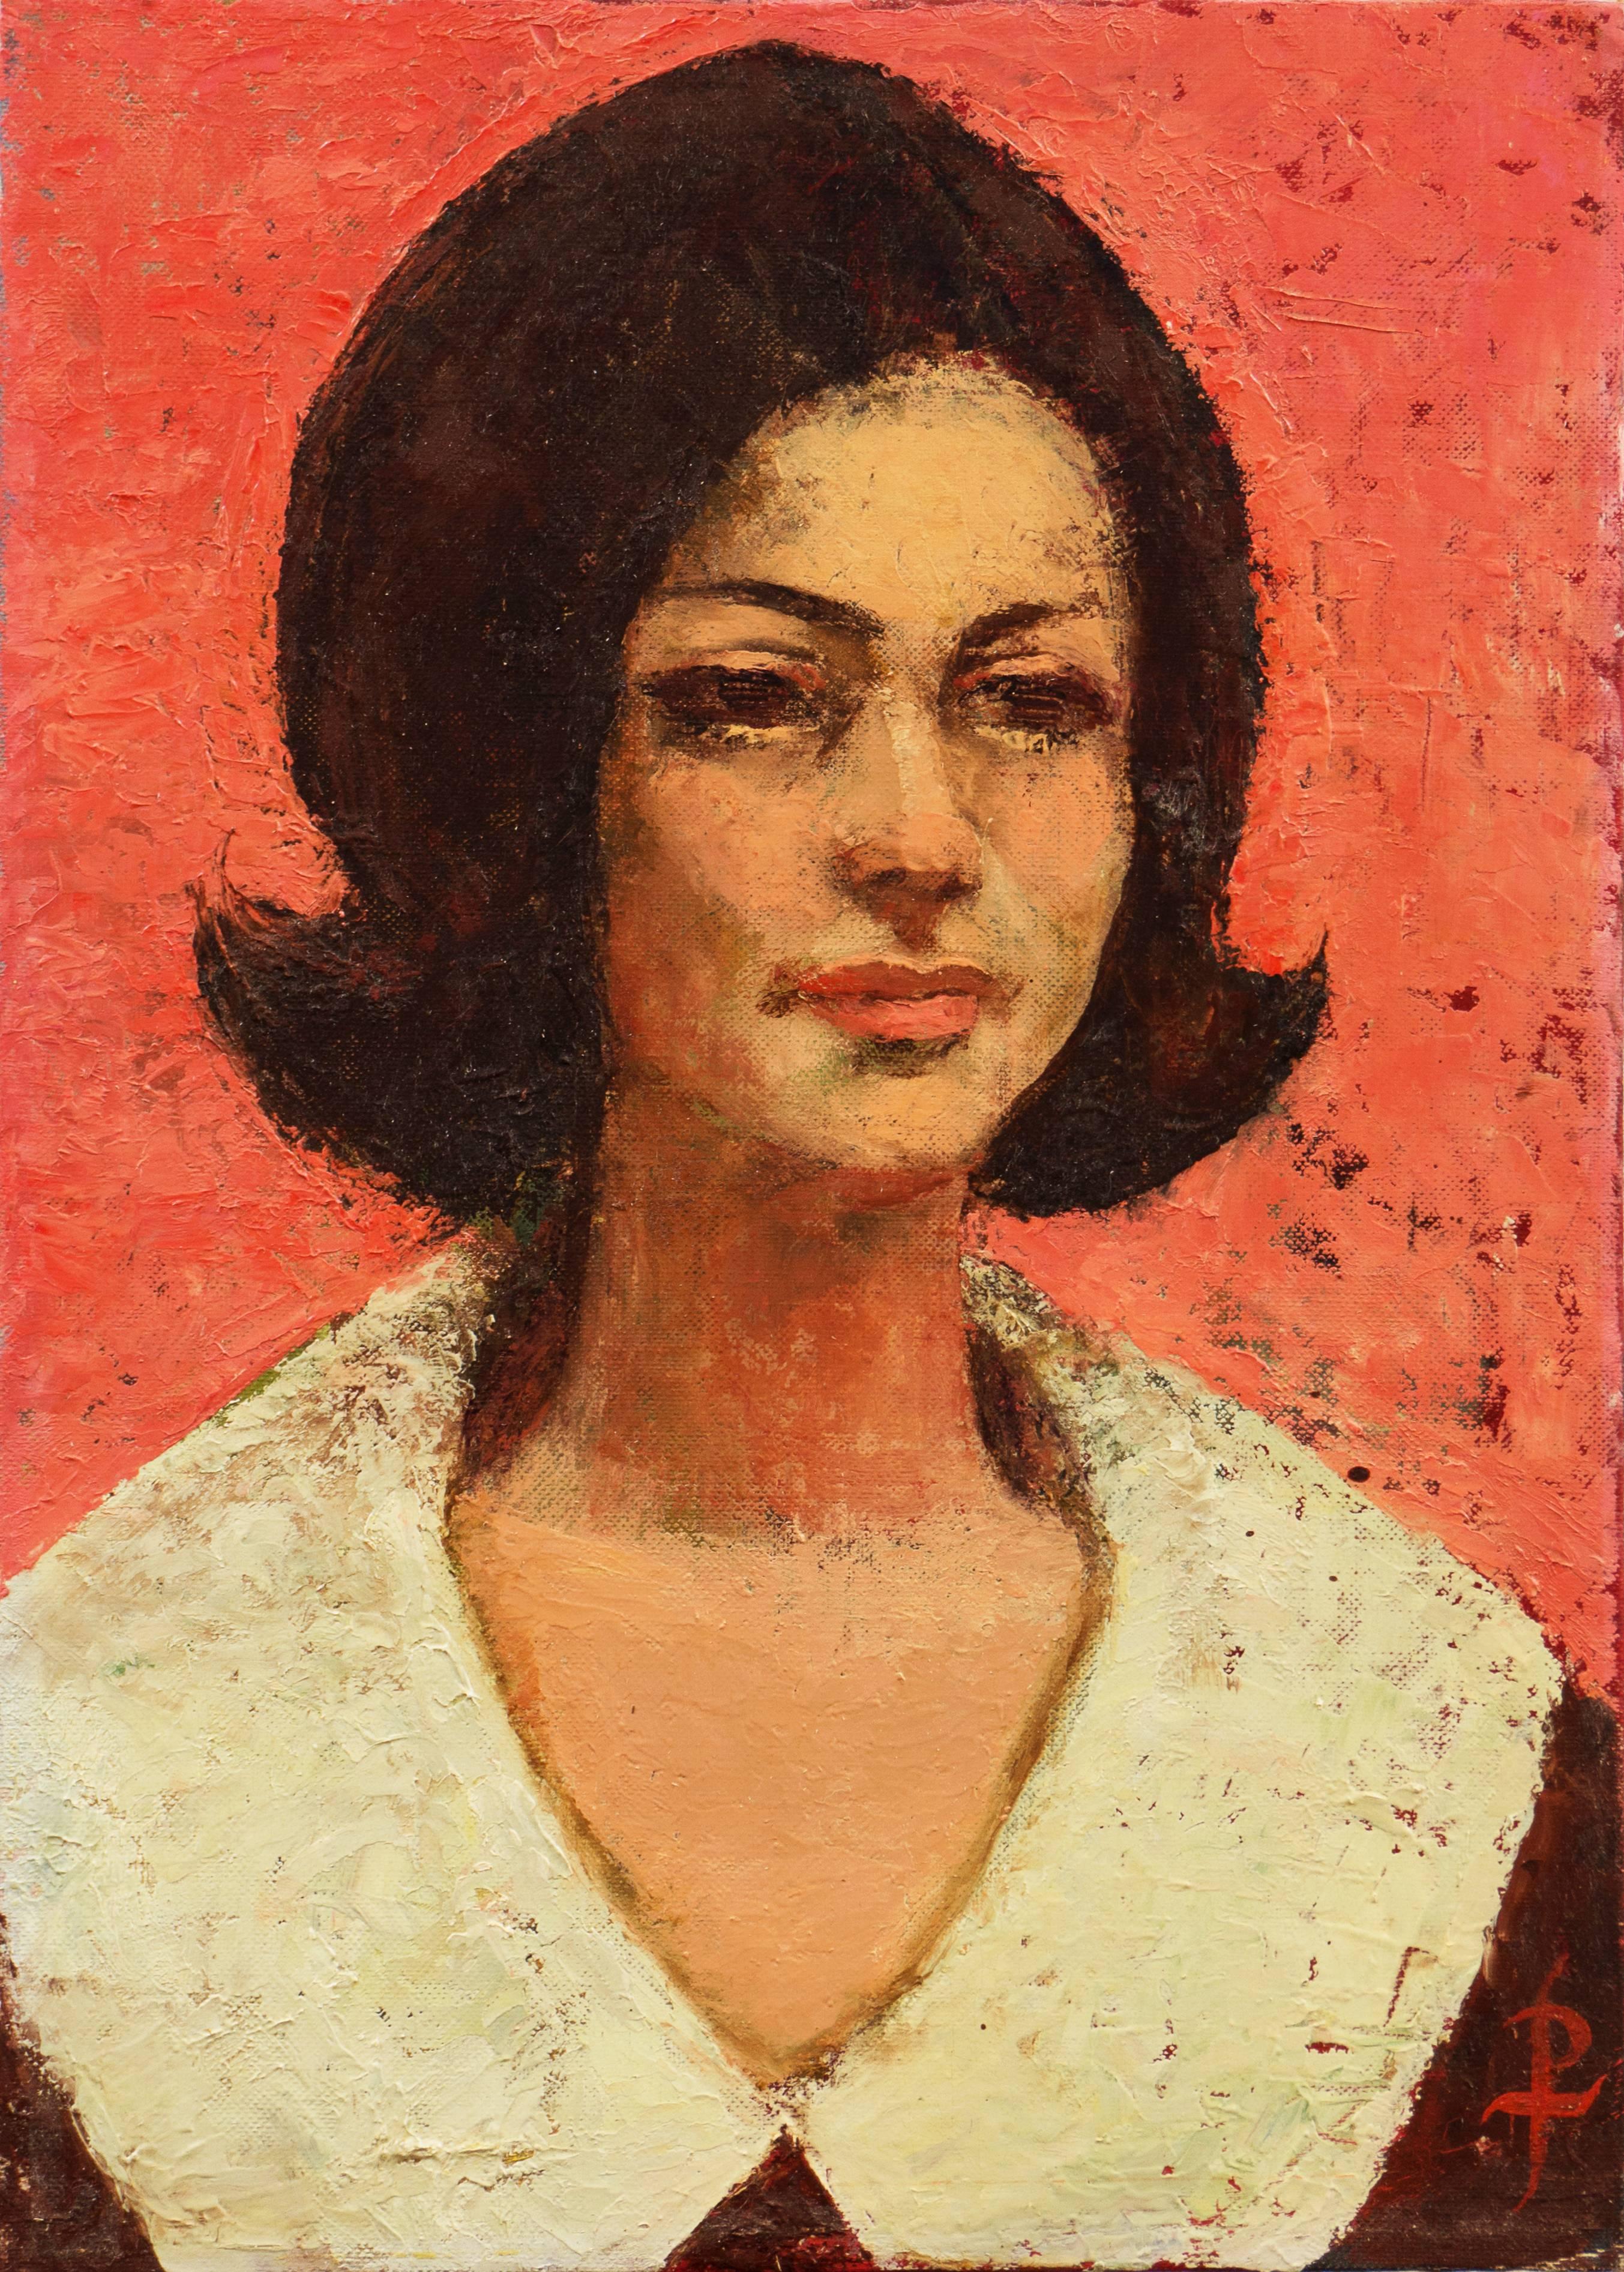 Pearl Took Portrait Painting - 'Portrait of a Young Woman', Sir John Cass, Otis Art Institute, California